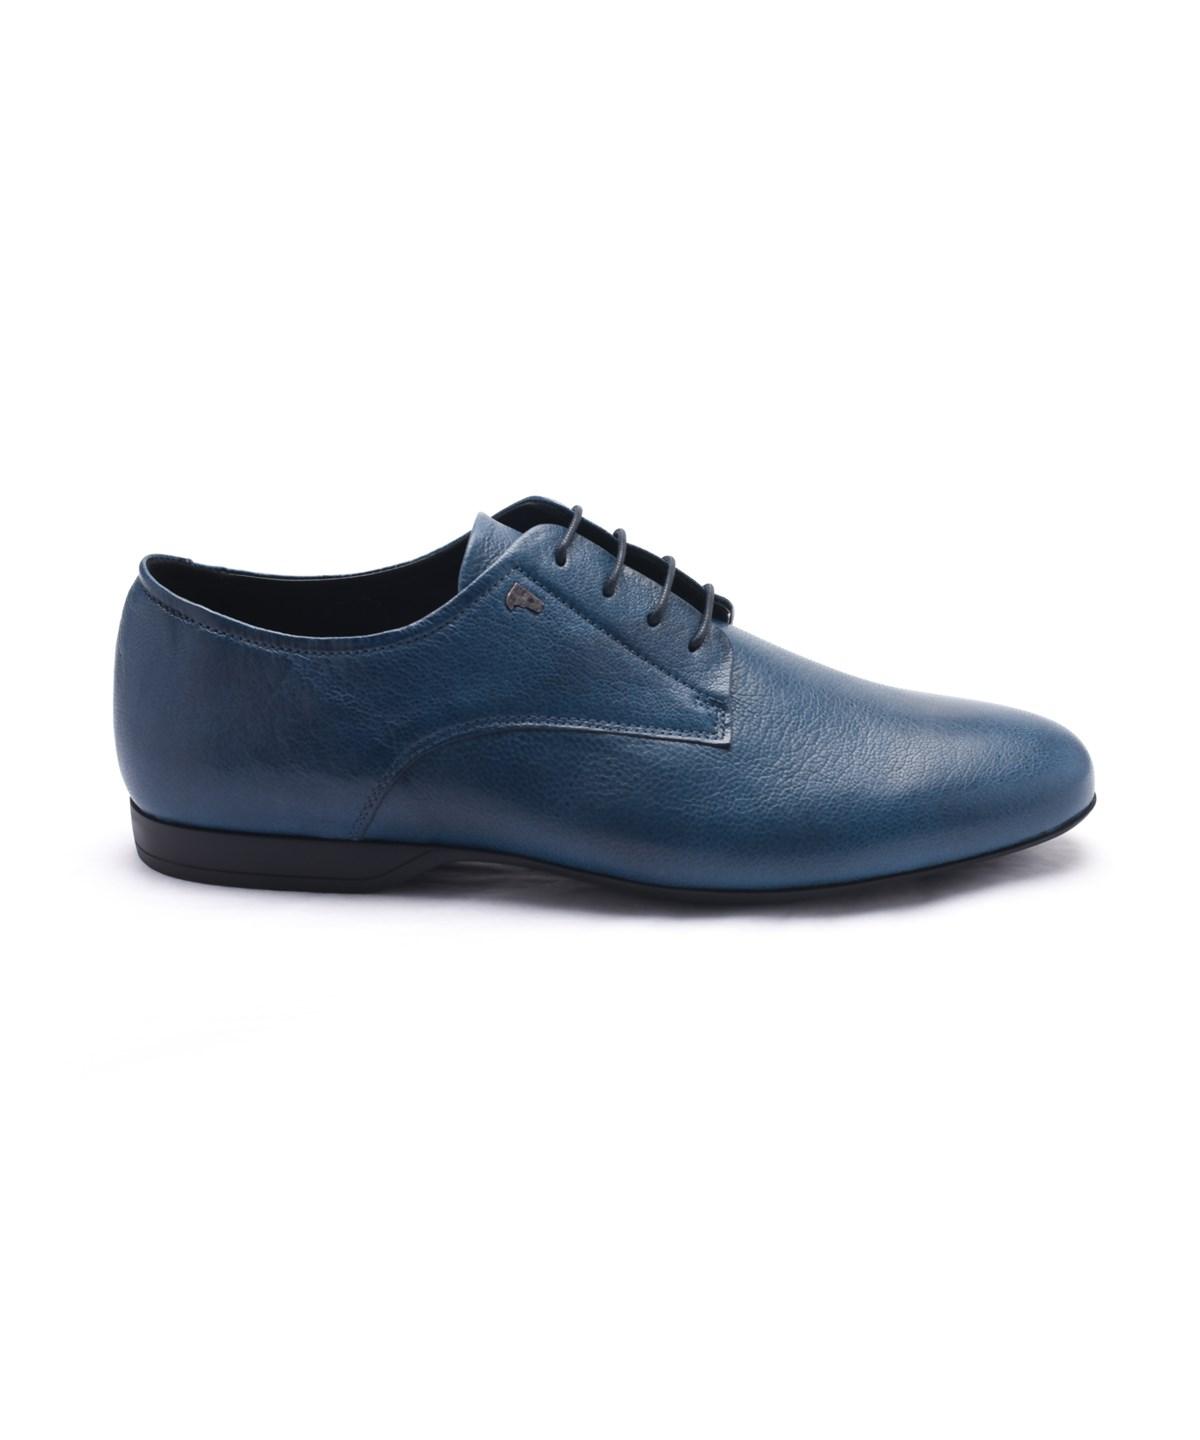 Versace Collection Men's Leather Oxford Lace-up Dress Shoes Blue ...